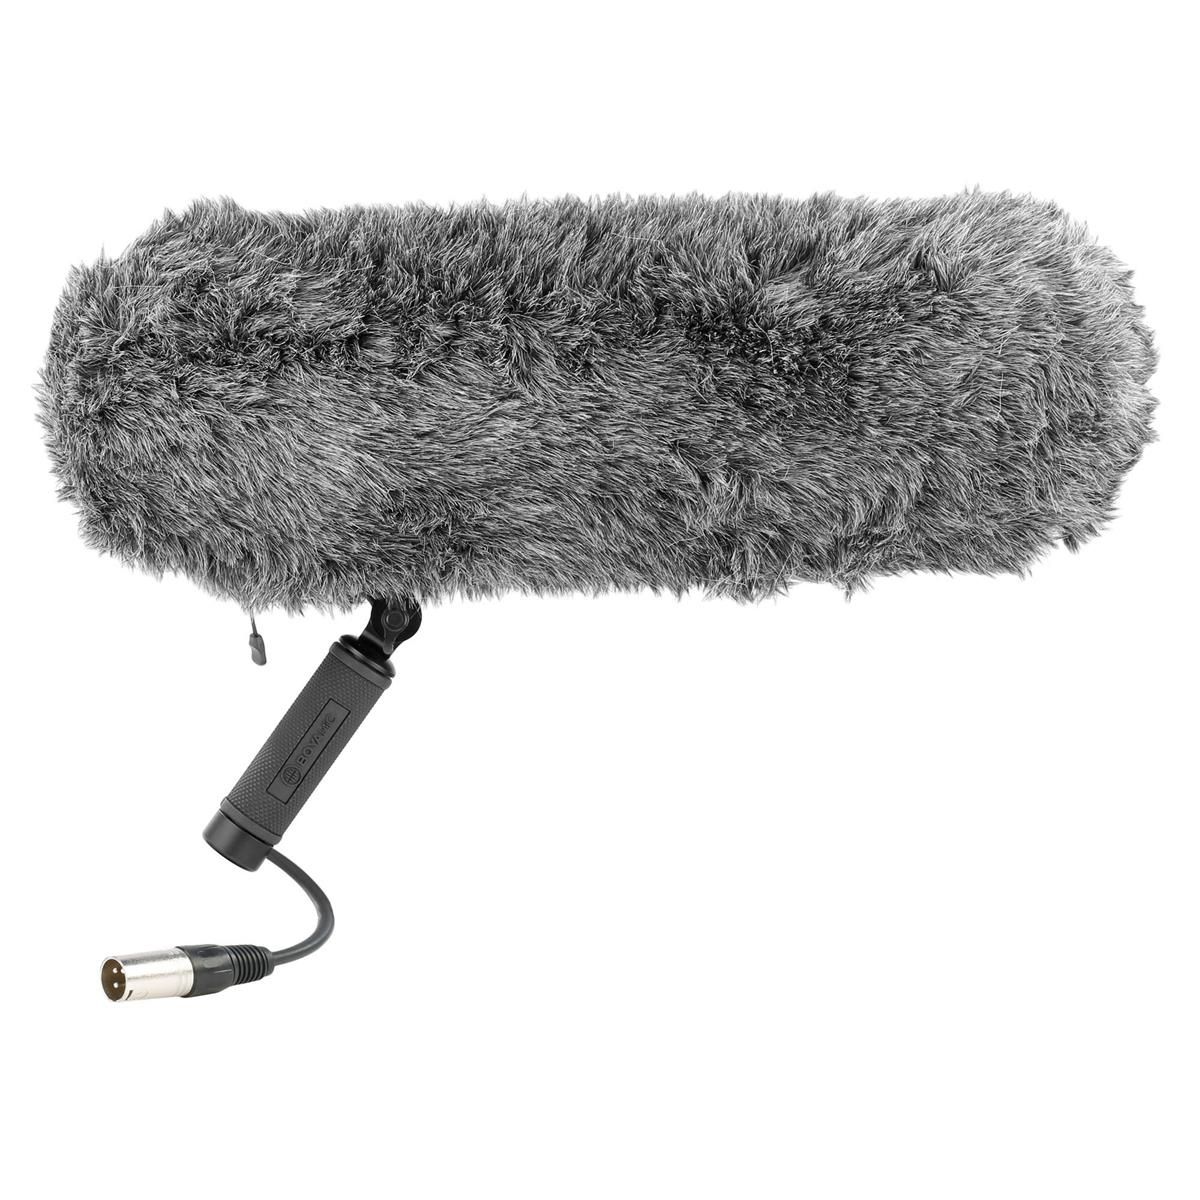 BOYA BY-WS1000 PROFESSIONAL WINDSHIELD AND SUSPENSION SYSTEM FOR SHOTGUN MICROPHONES